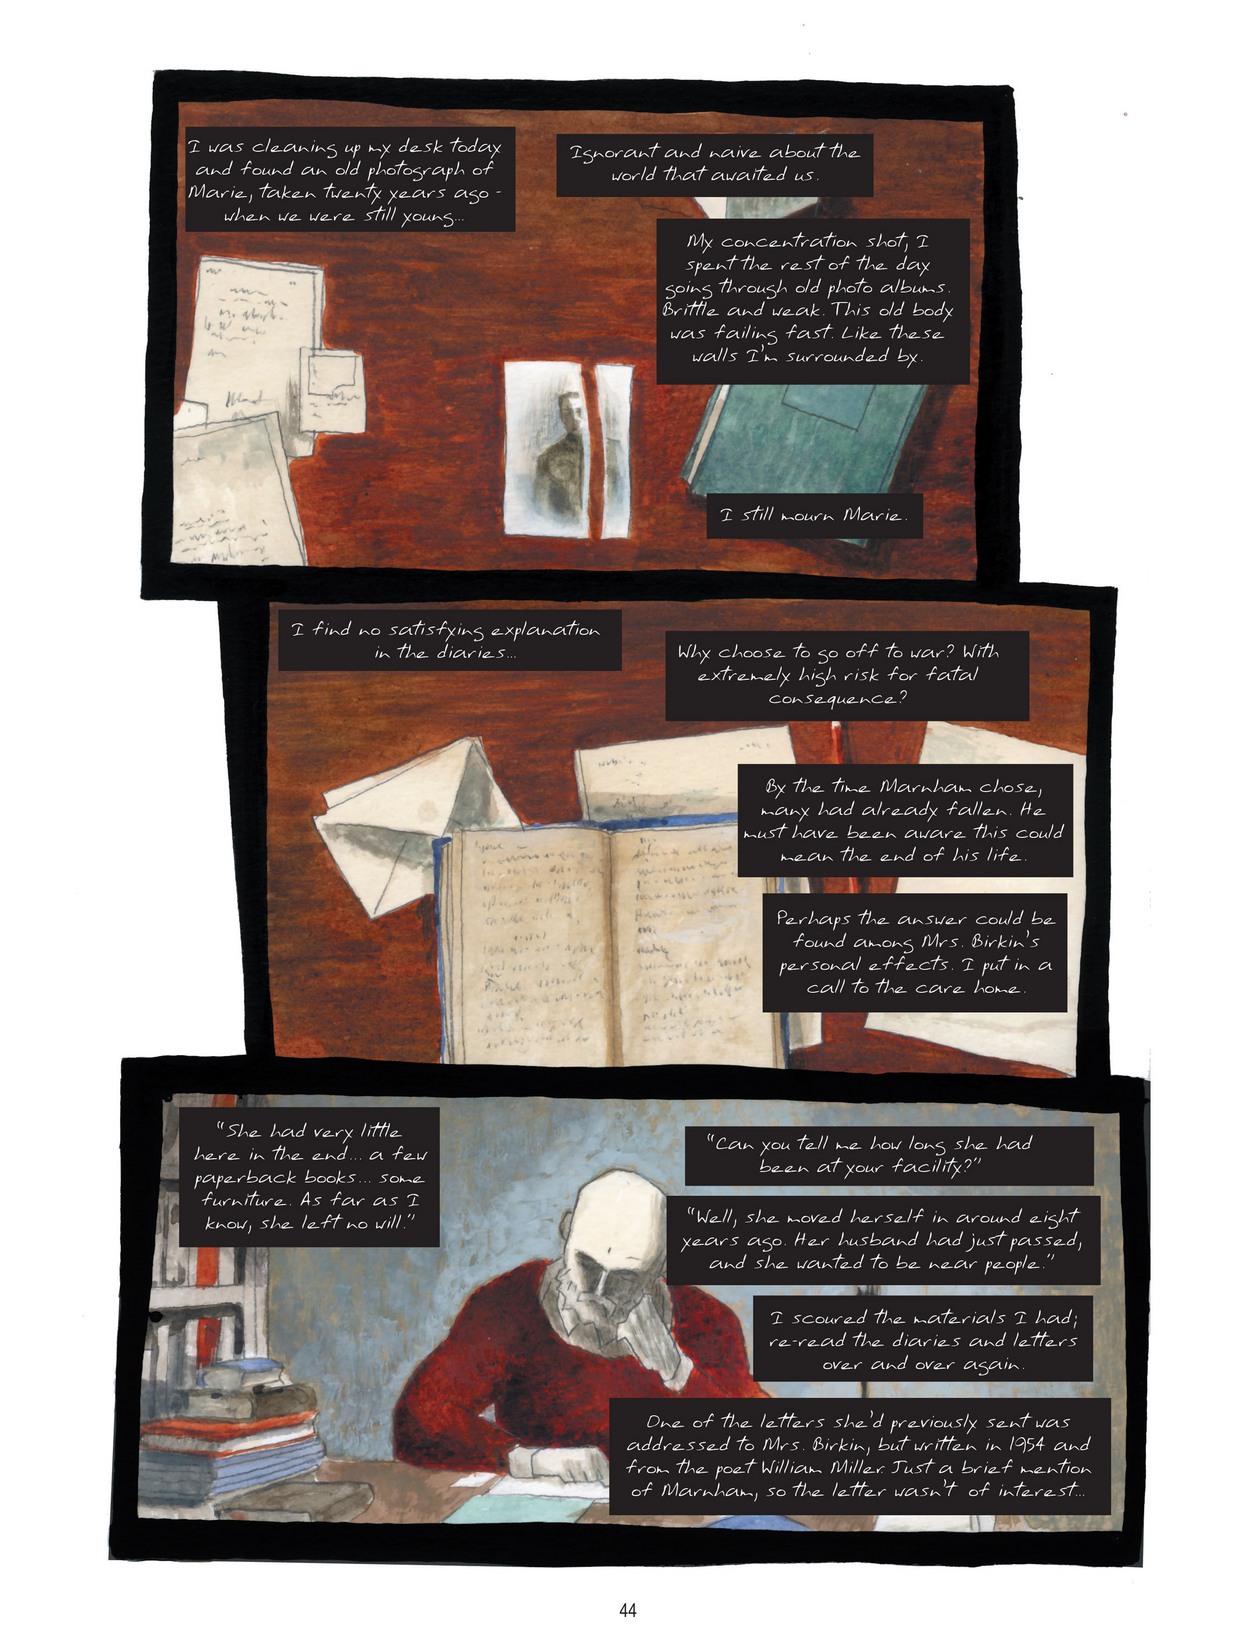 Read online The Red Diary / The Re[a]d Diary comic -  Issue # TPB - 45